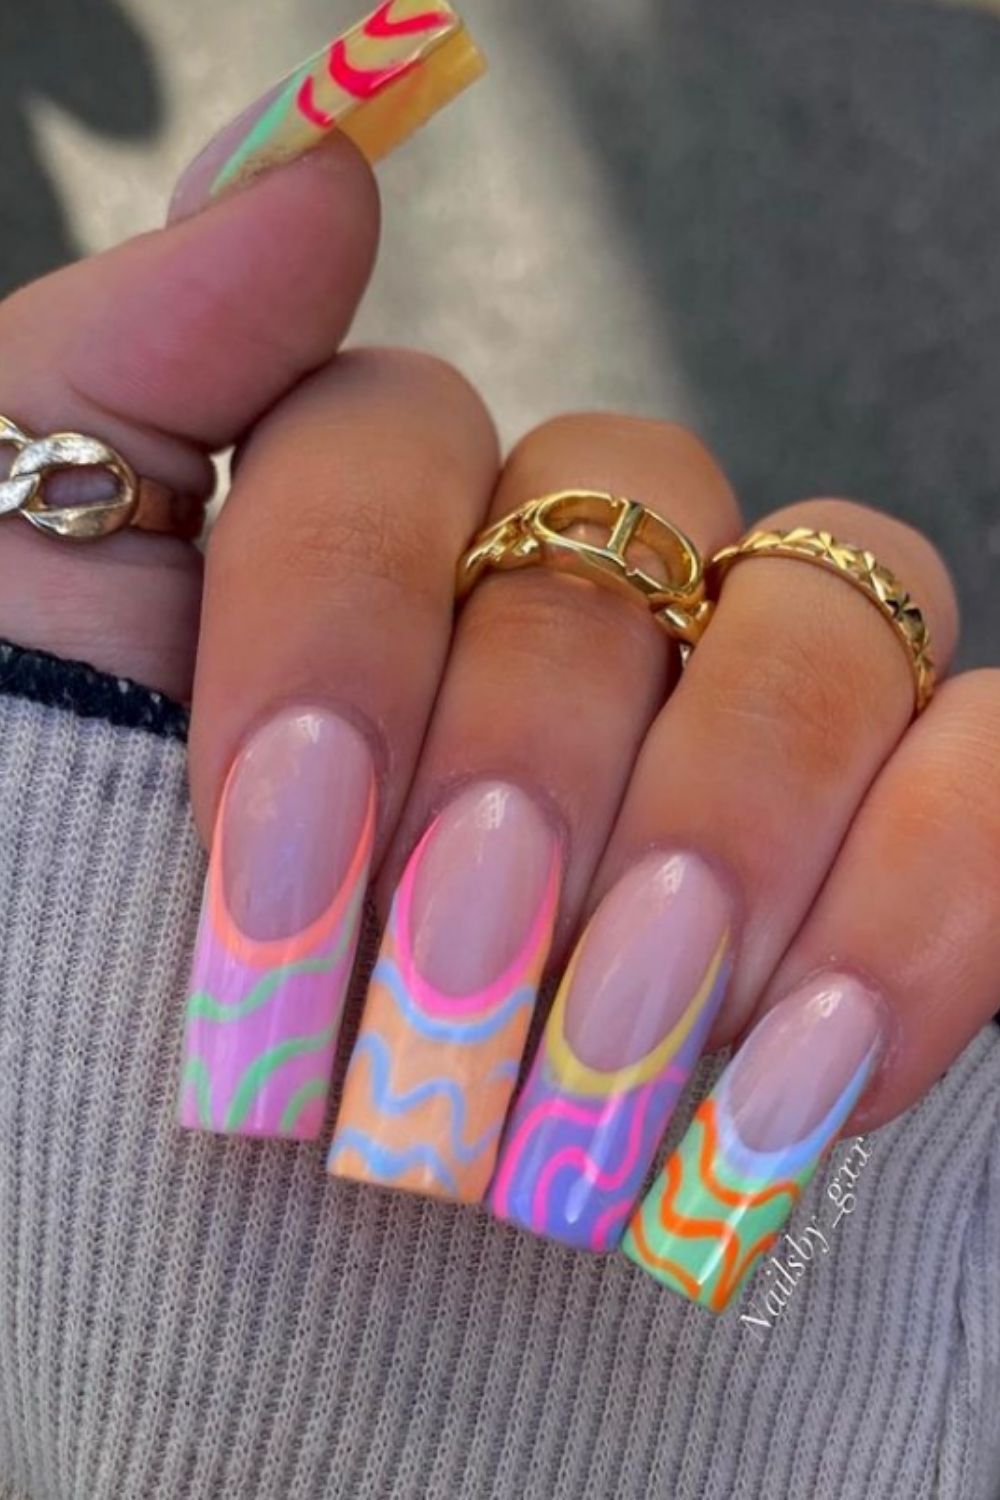 Pretty Summer Acrylic Nails To Try When You Go A Vacation!